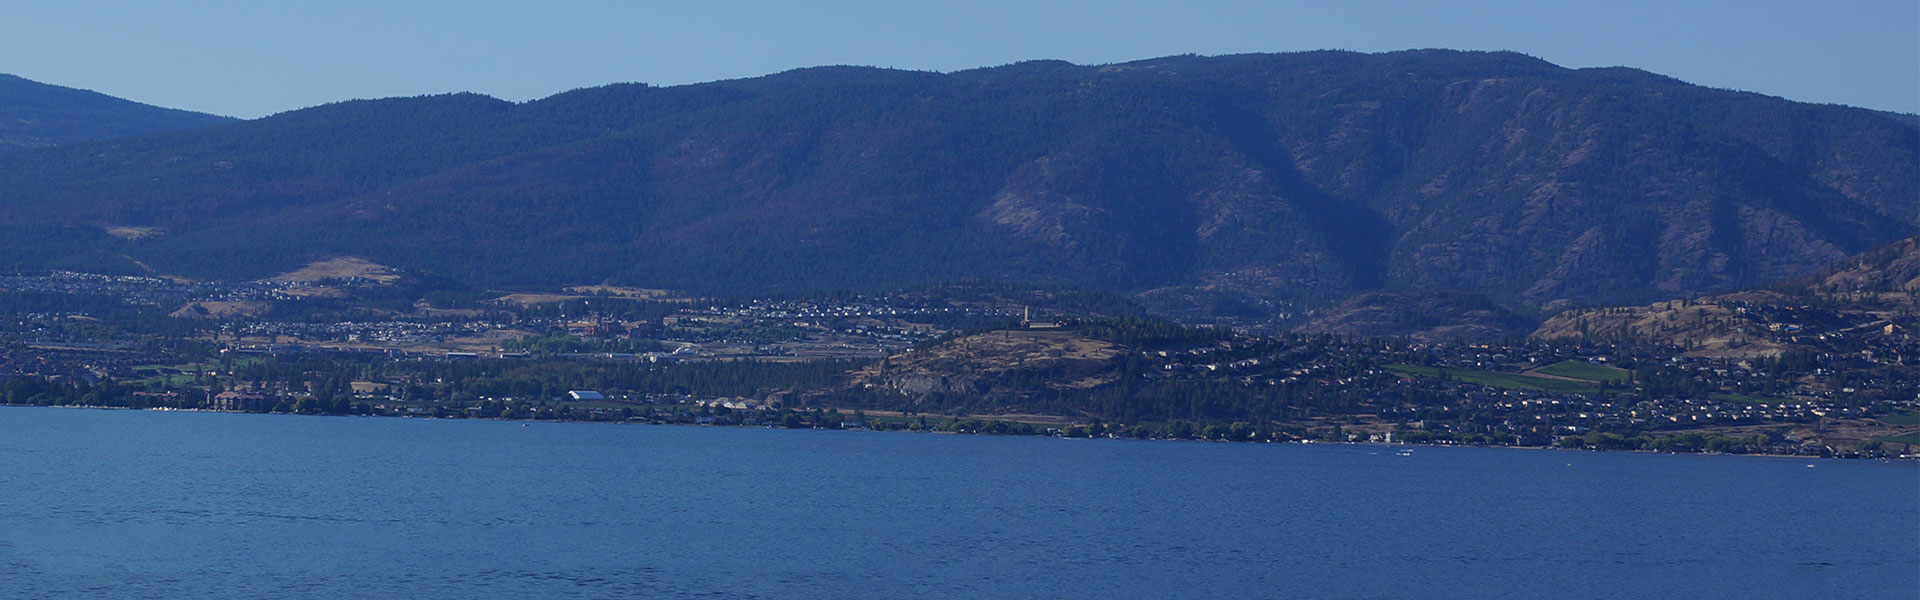 There have been reports of a strange creature in Lake Okanagan for hundreds of years.